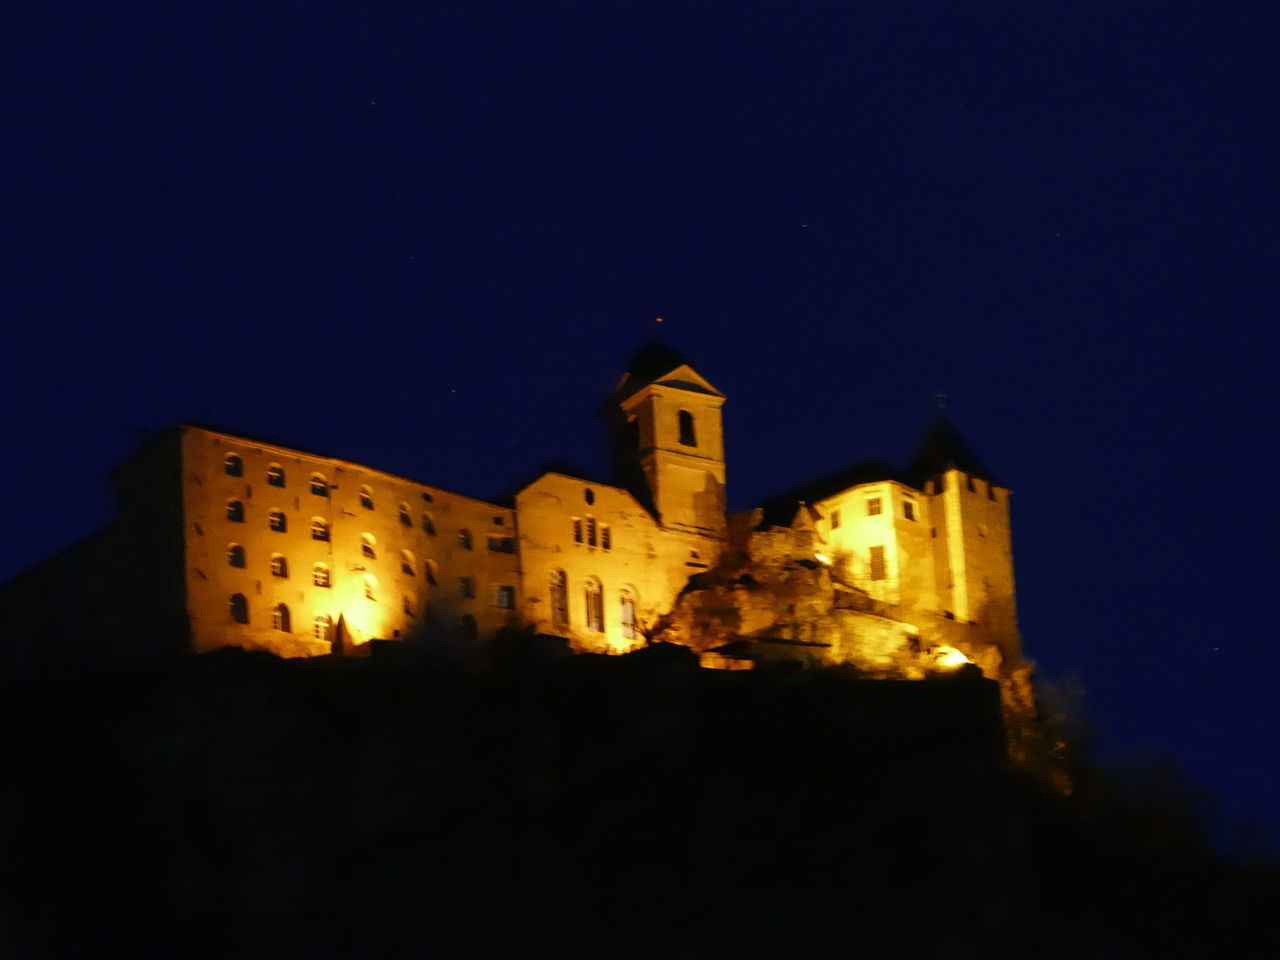 LOW ANGLE VIEW OF ILLUMINATED HISTORIC BUILDING AGAINST SKY AT NIGHT